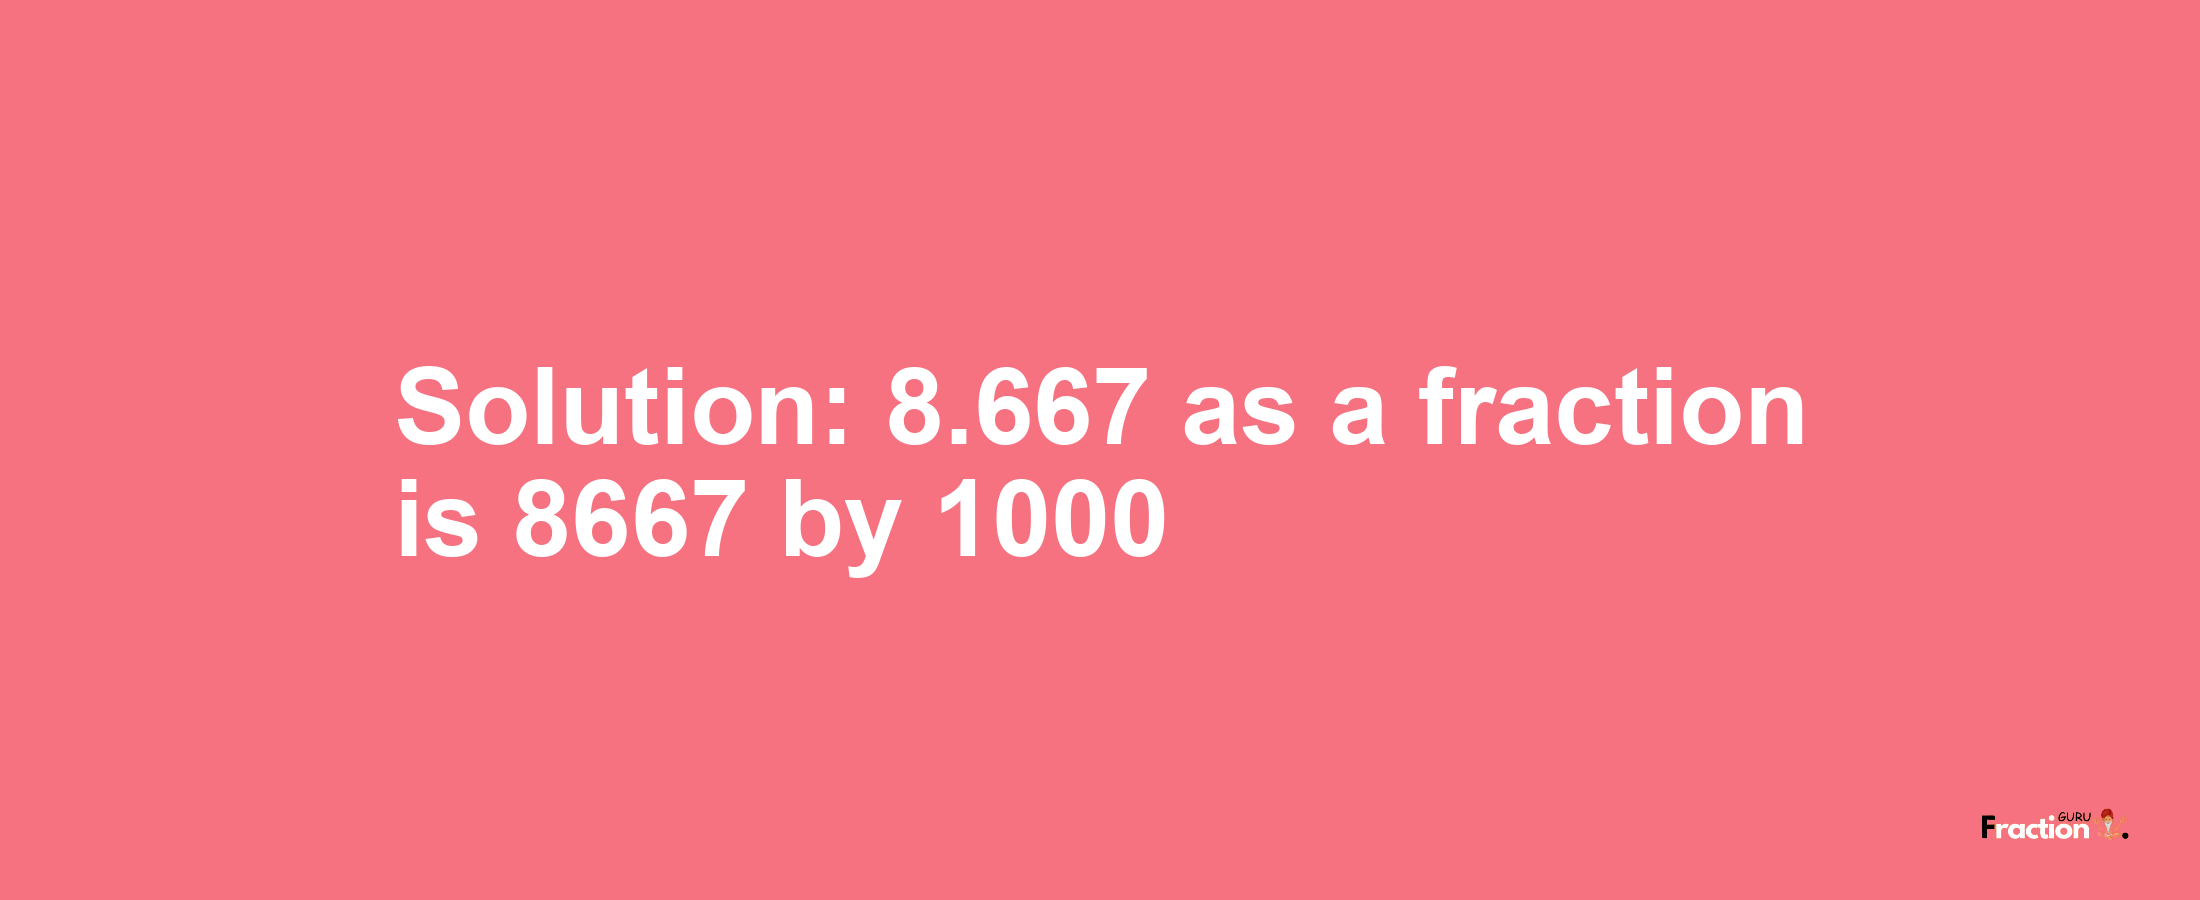 Solution:8.667 as a fraction is 8667/1000